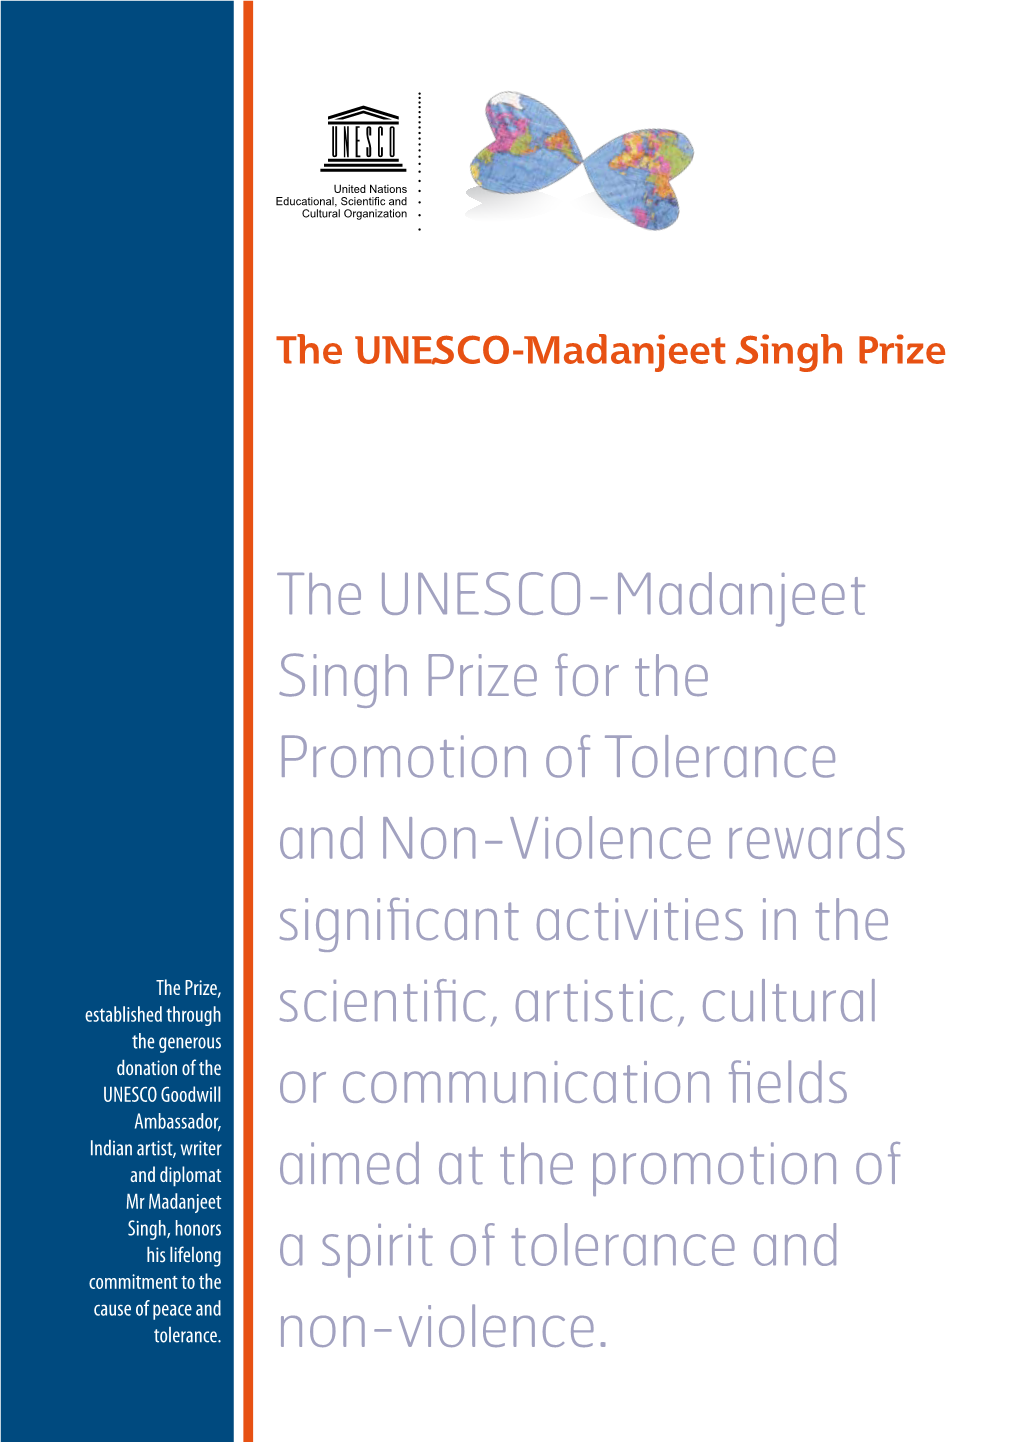 The UNESCO-Madanjeet Singh Prize for the Promotion of Tolerance and Non-Violence Rewards Significant Activities in The